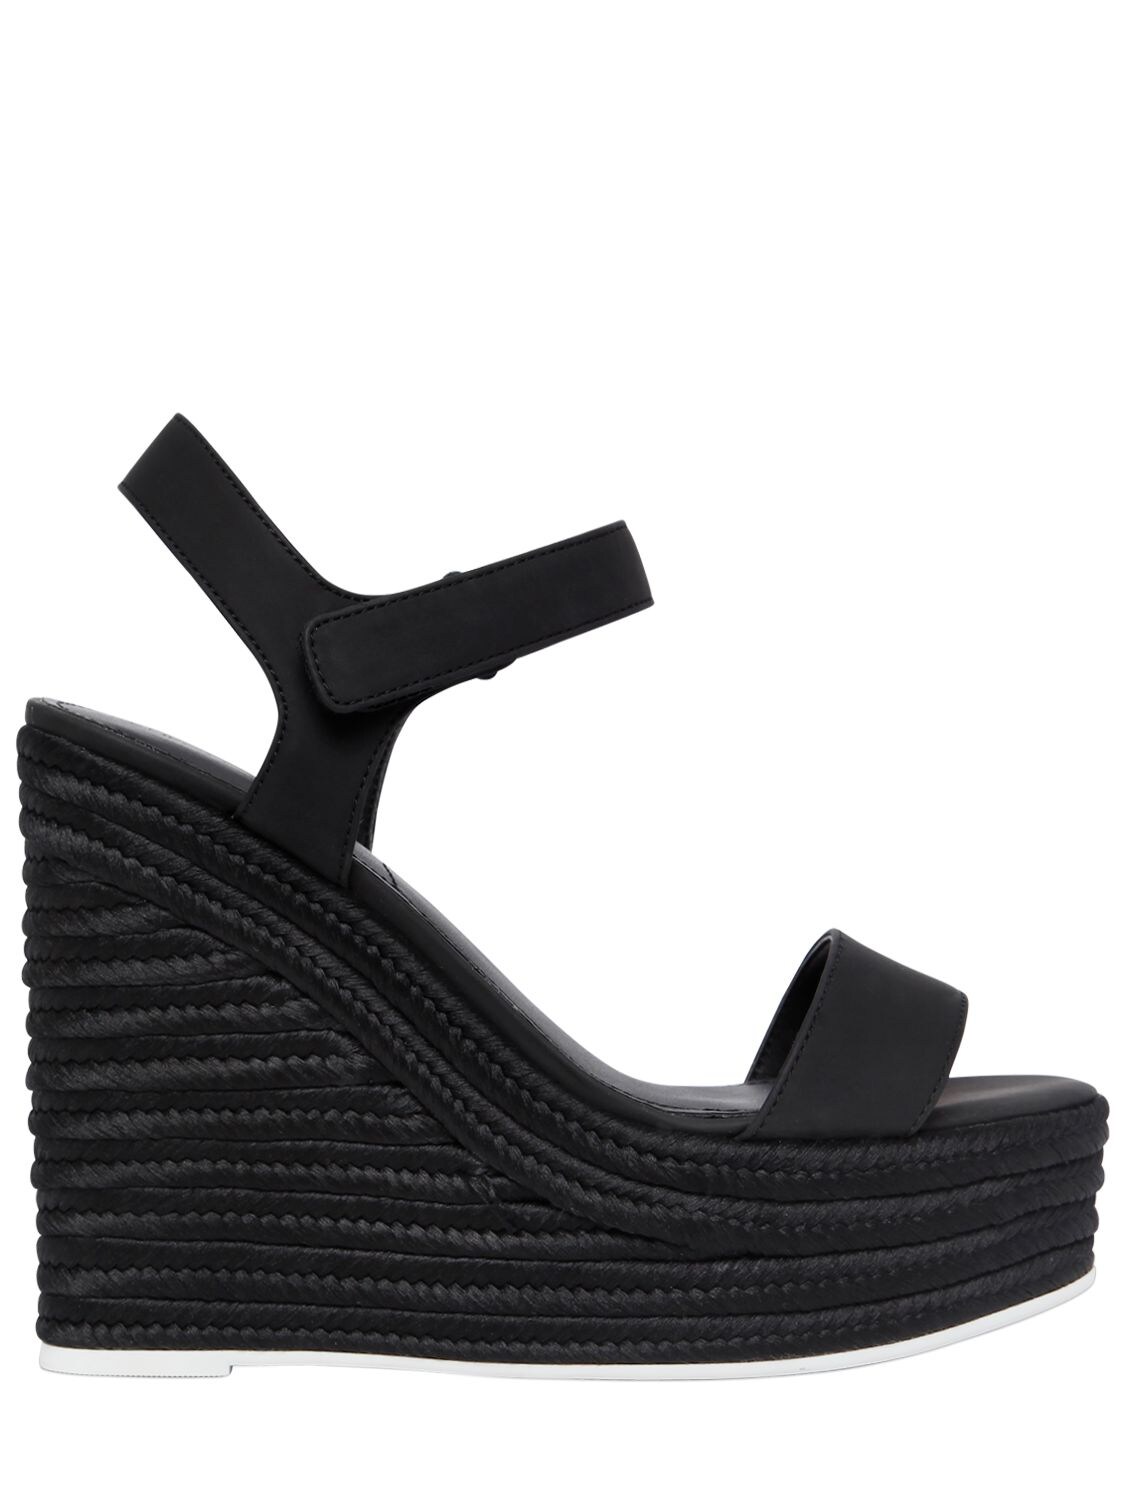 Kendall + Kylie 120mm Grand Faux Leather Wedges In Black